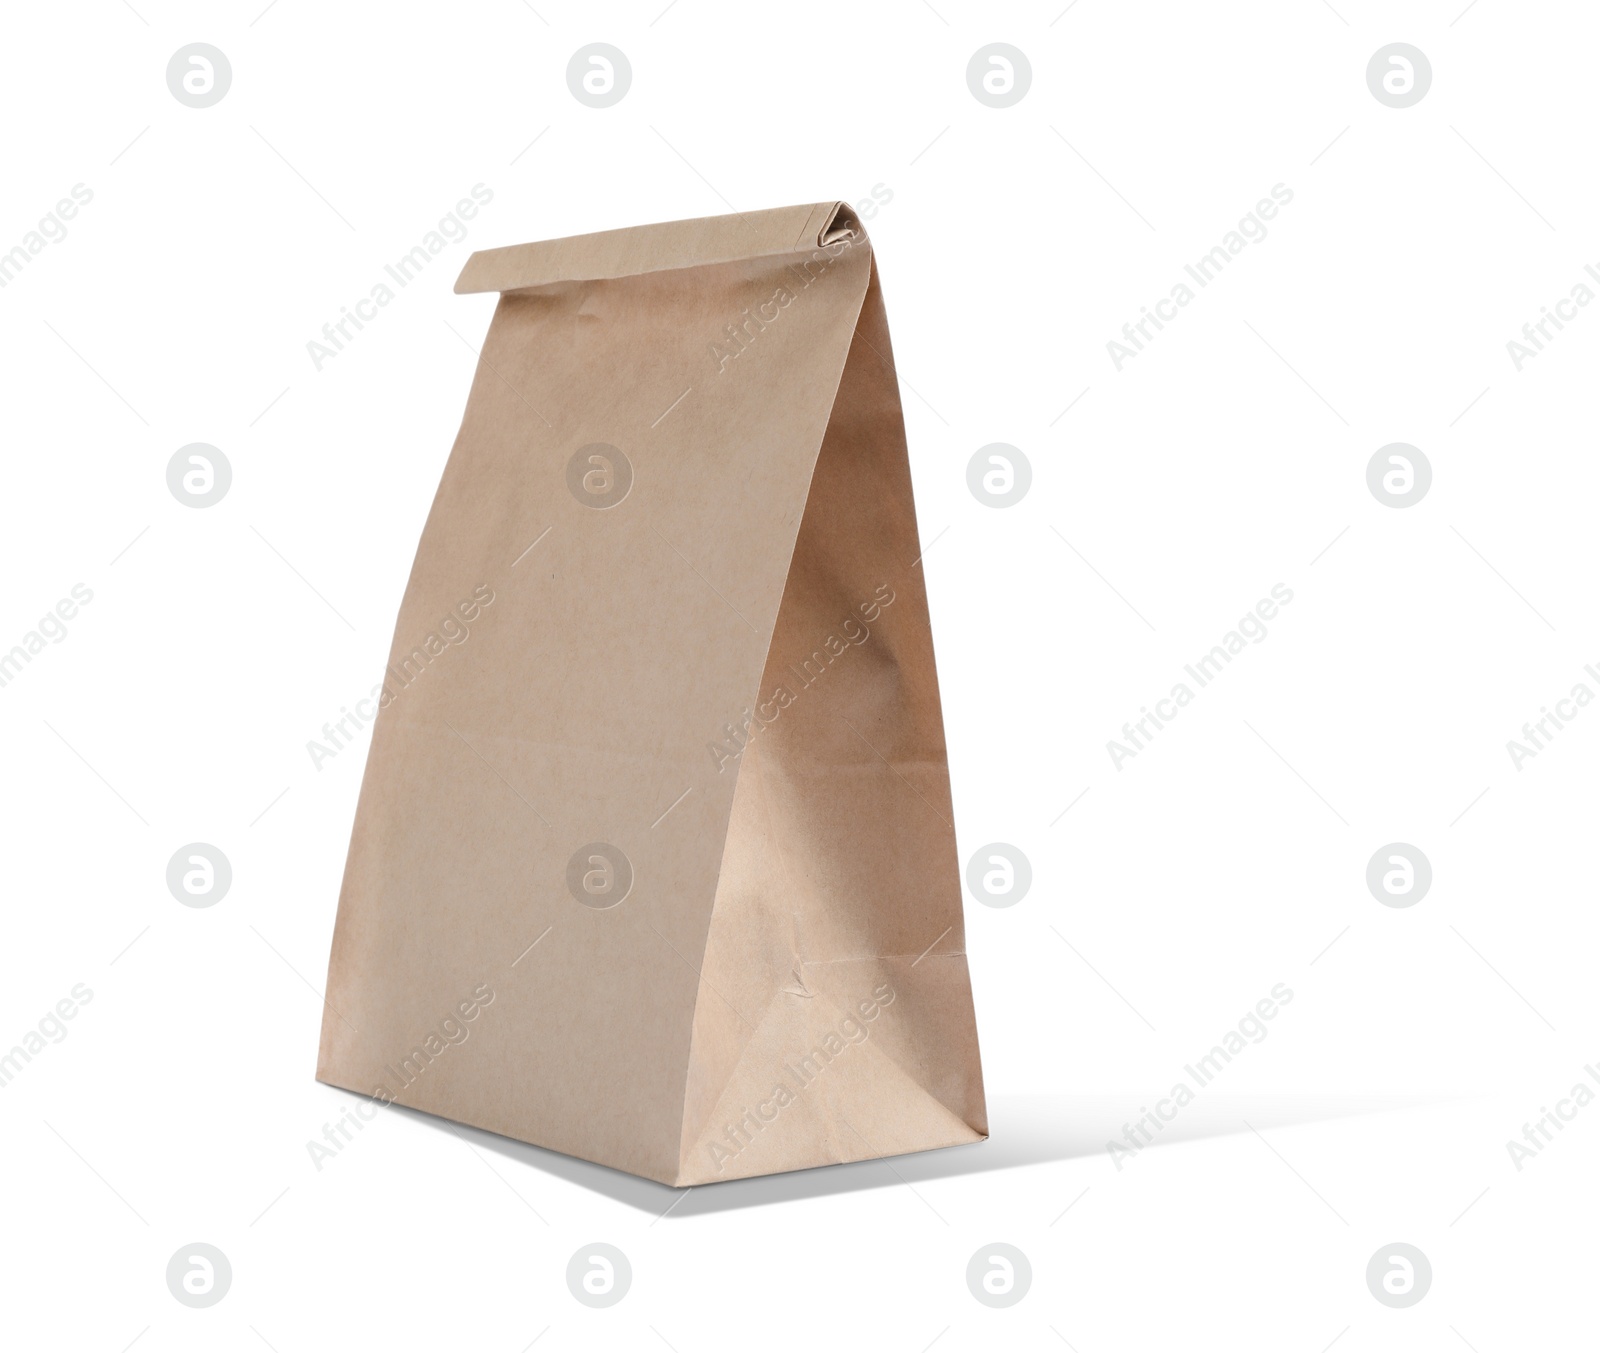 Image of New closed paper bag on white background